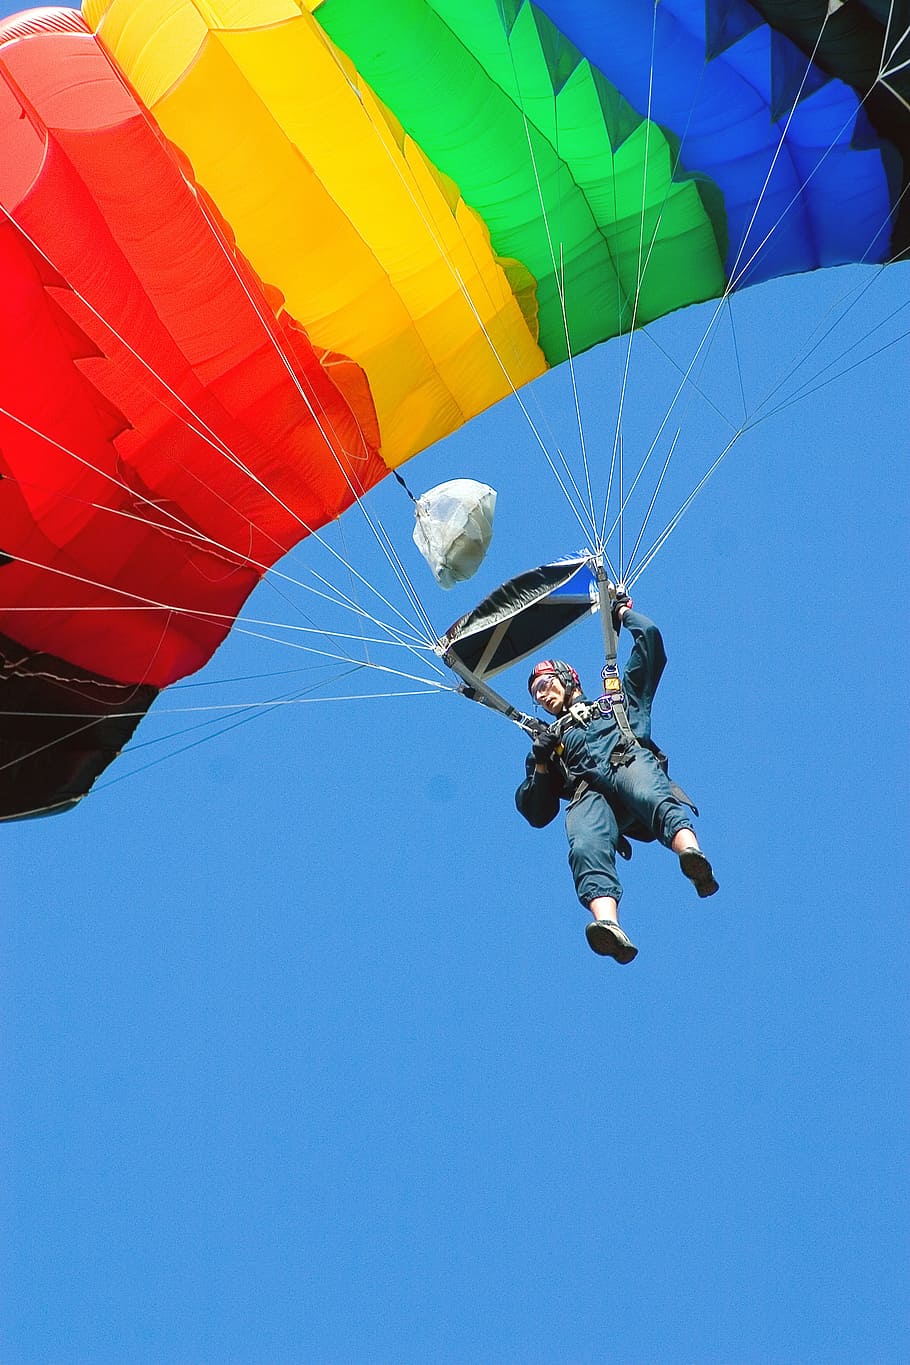 skydiving, sport, extreme sports, parachutist, competition, mid-air, adventure, parachute, one person, real people